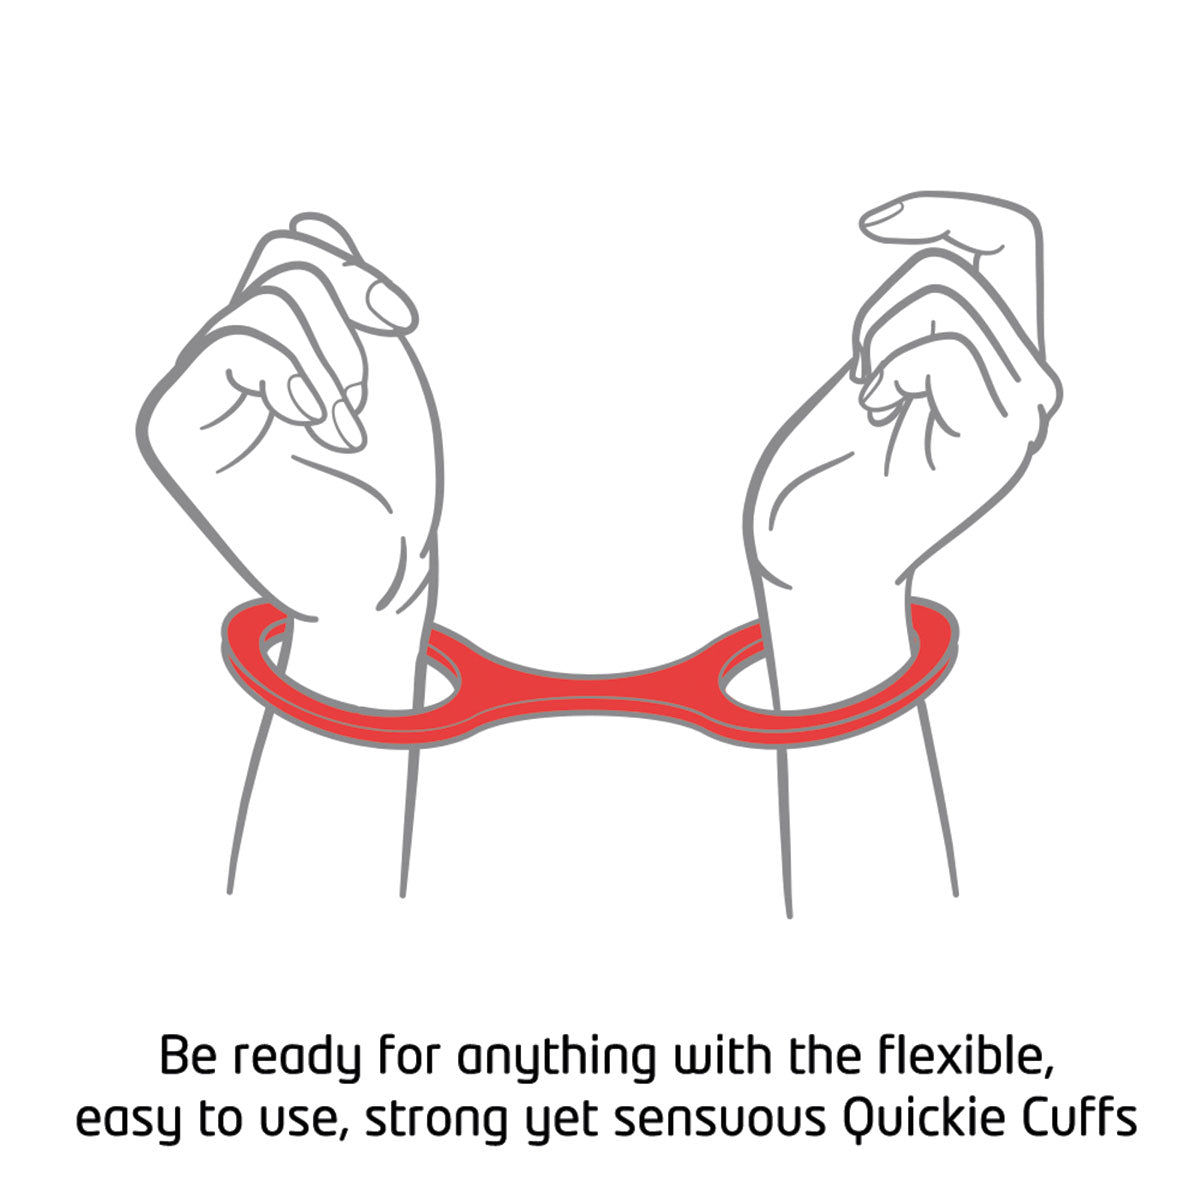 Cartoon image of hands in red quickie cuffs. Text reads: Be ready for anything with the flexible, easy to use, strong yet sensuous Quickie Cuffs.